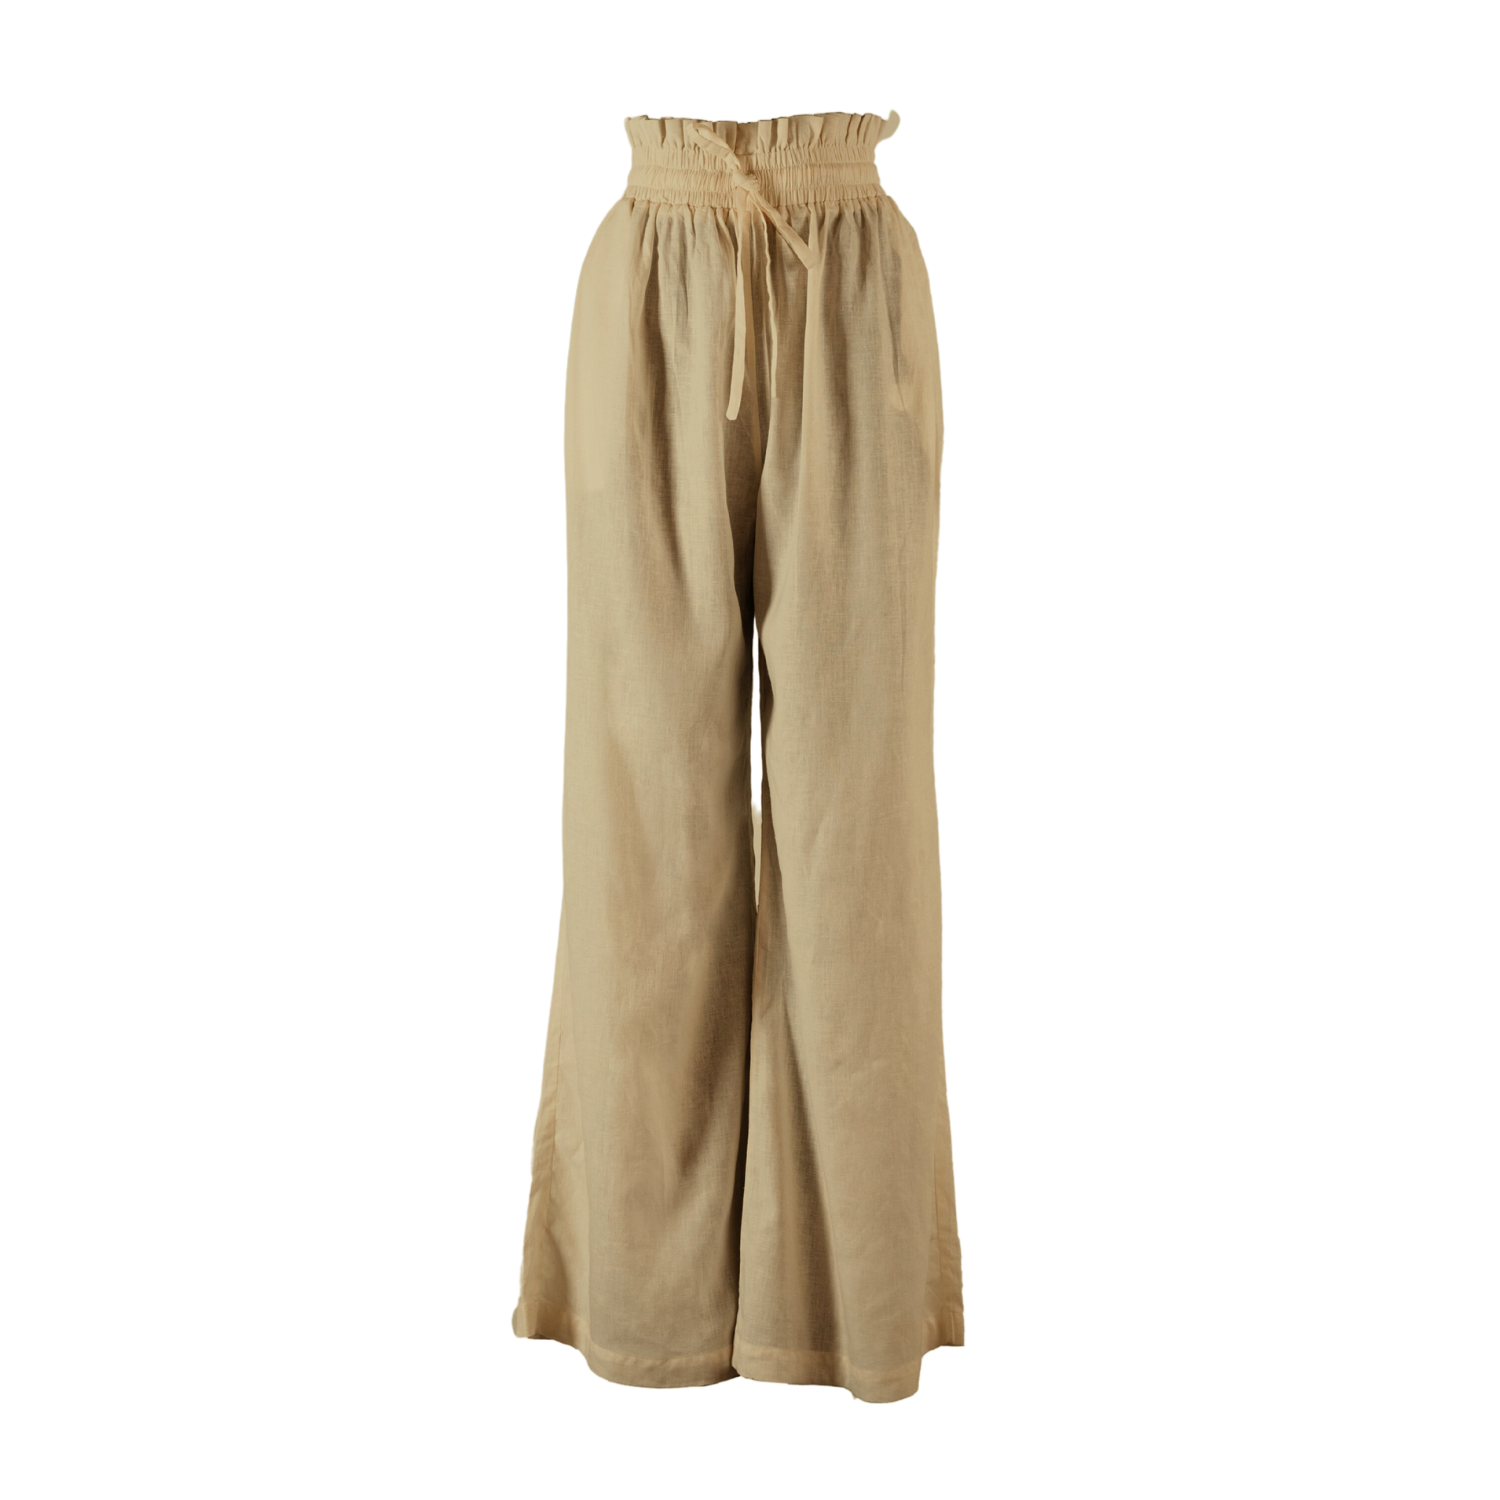 Kampot High Waisted Lounge Pant in Camel